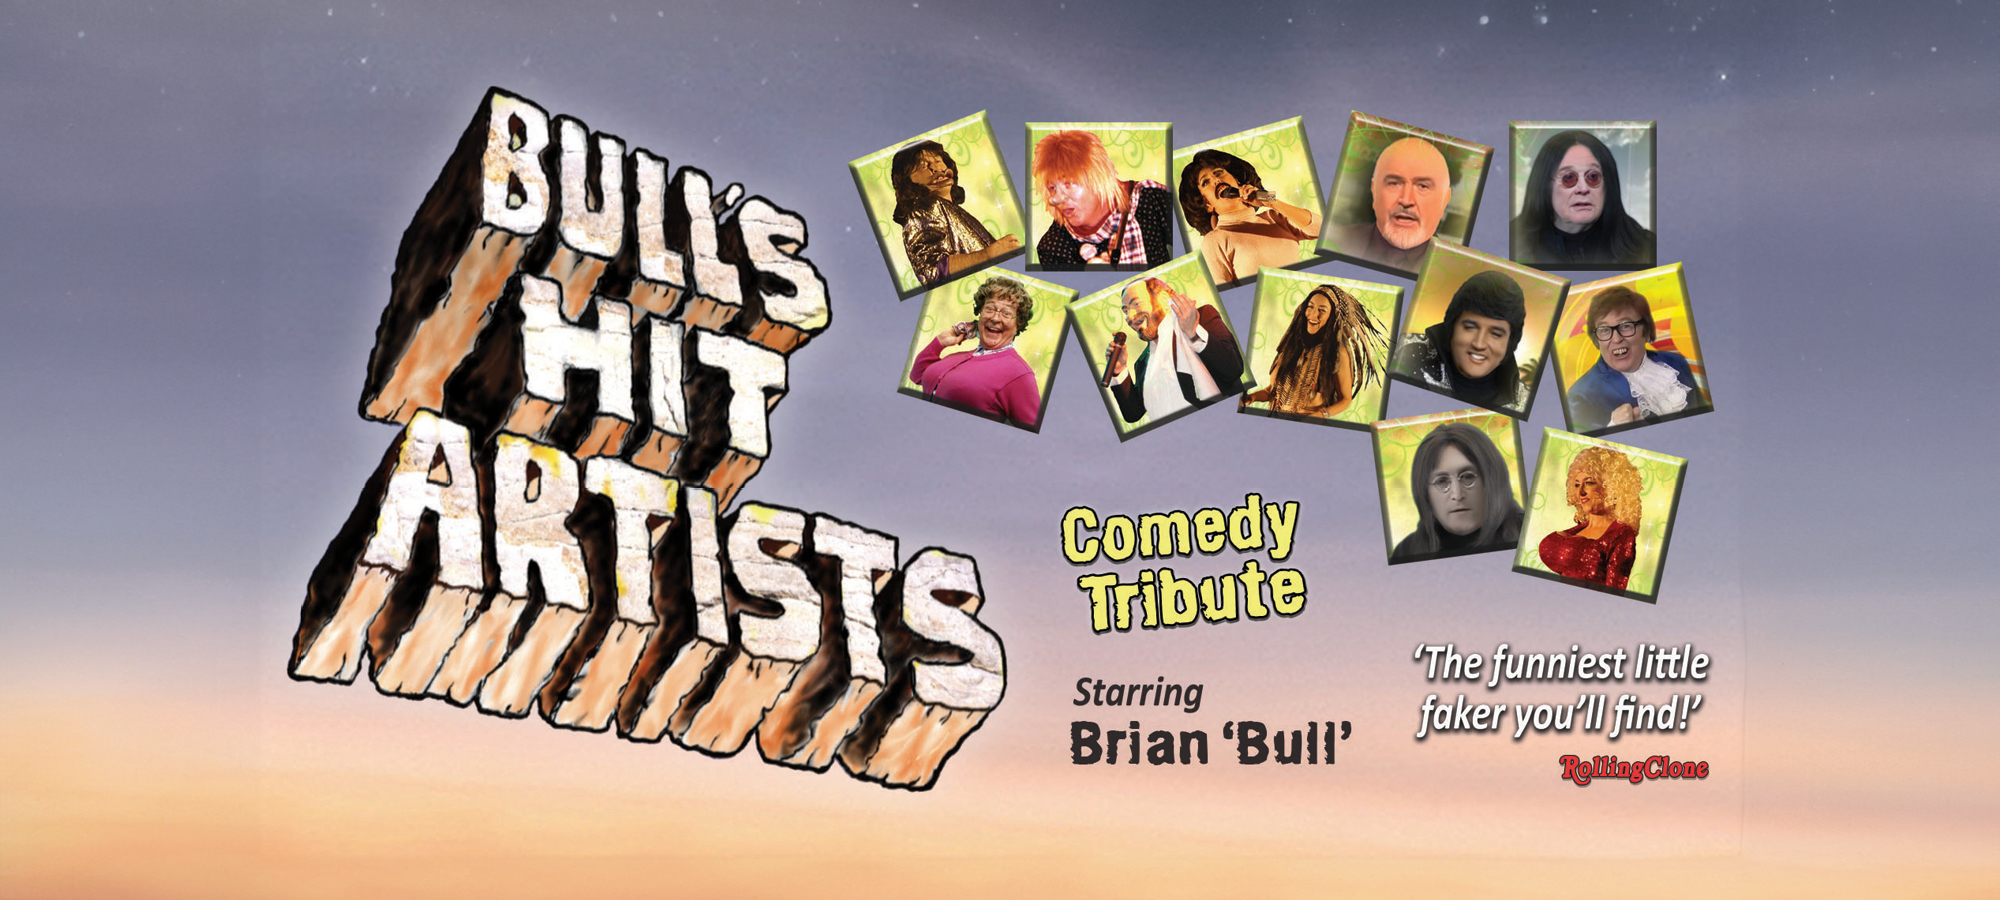 Bull’s Hit Artists – Comedy Tribute – Free Show